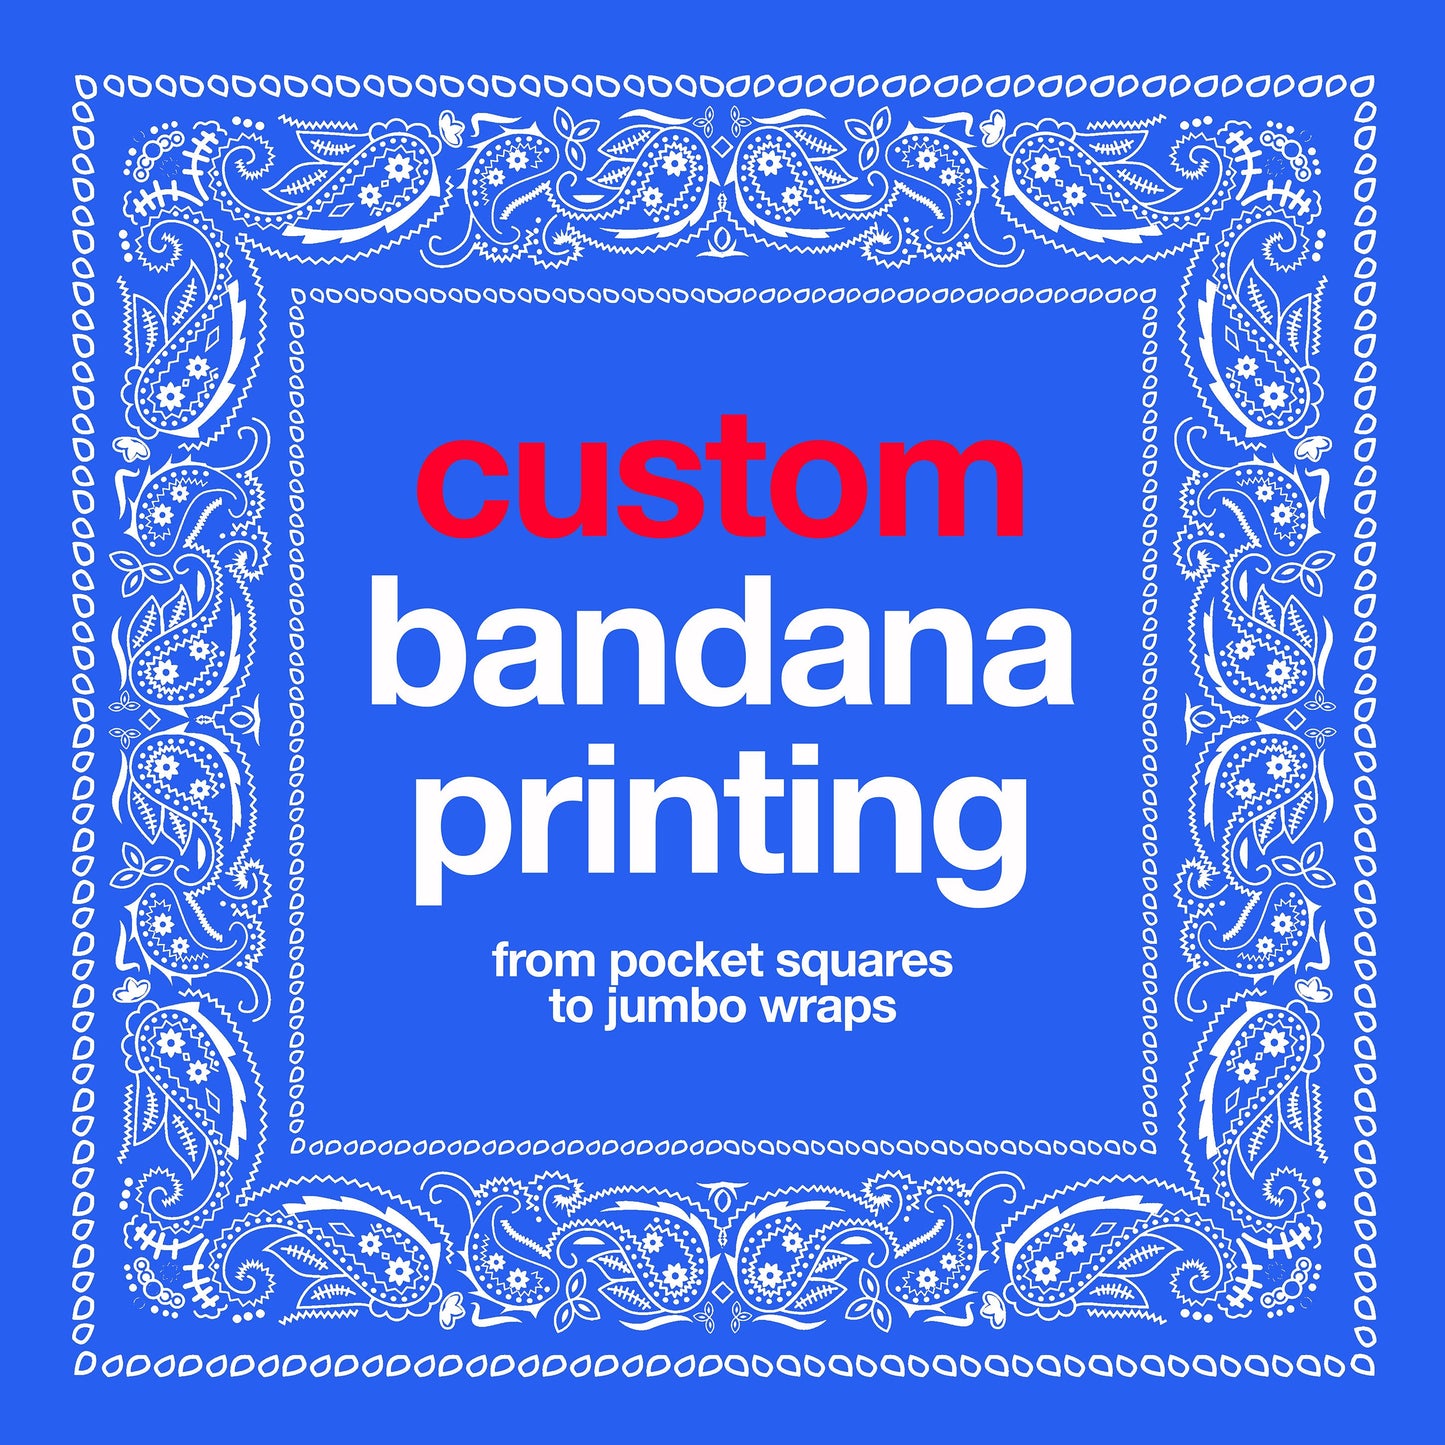 Custom Printed Bandanas, Create Your Own Personalized Photo Image Head Wrap, Scarves or Sarongs